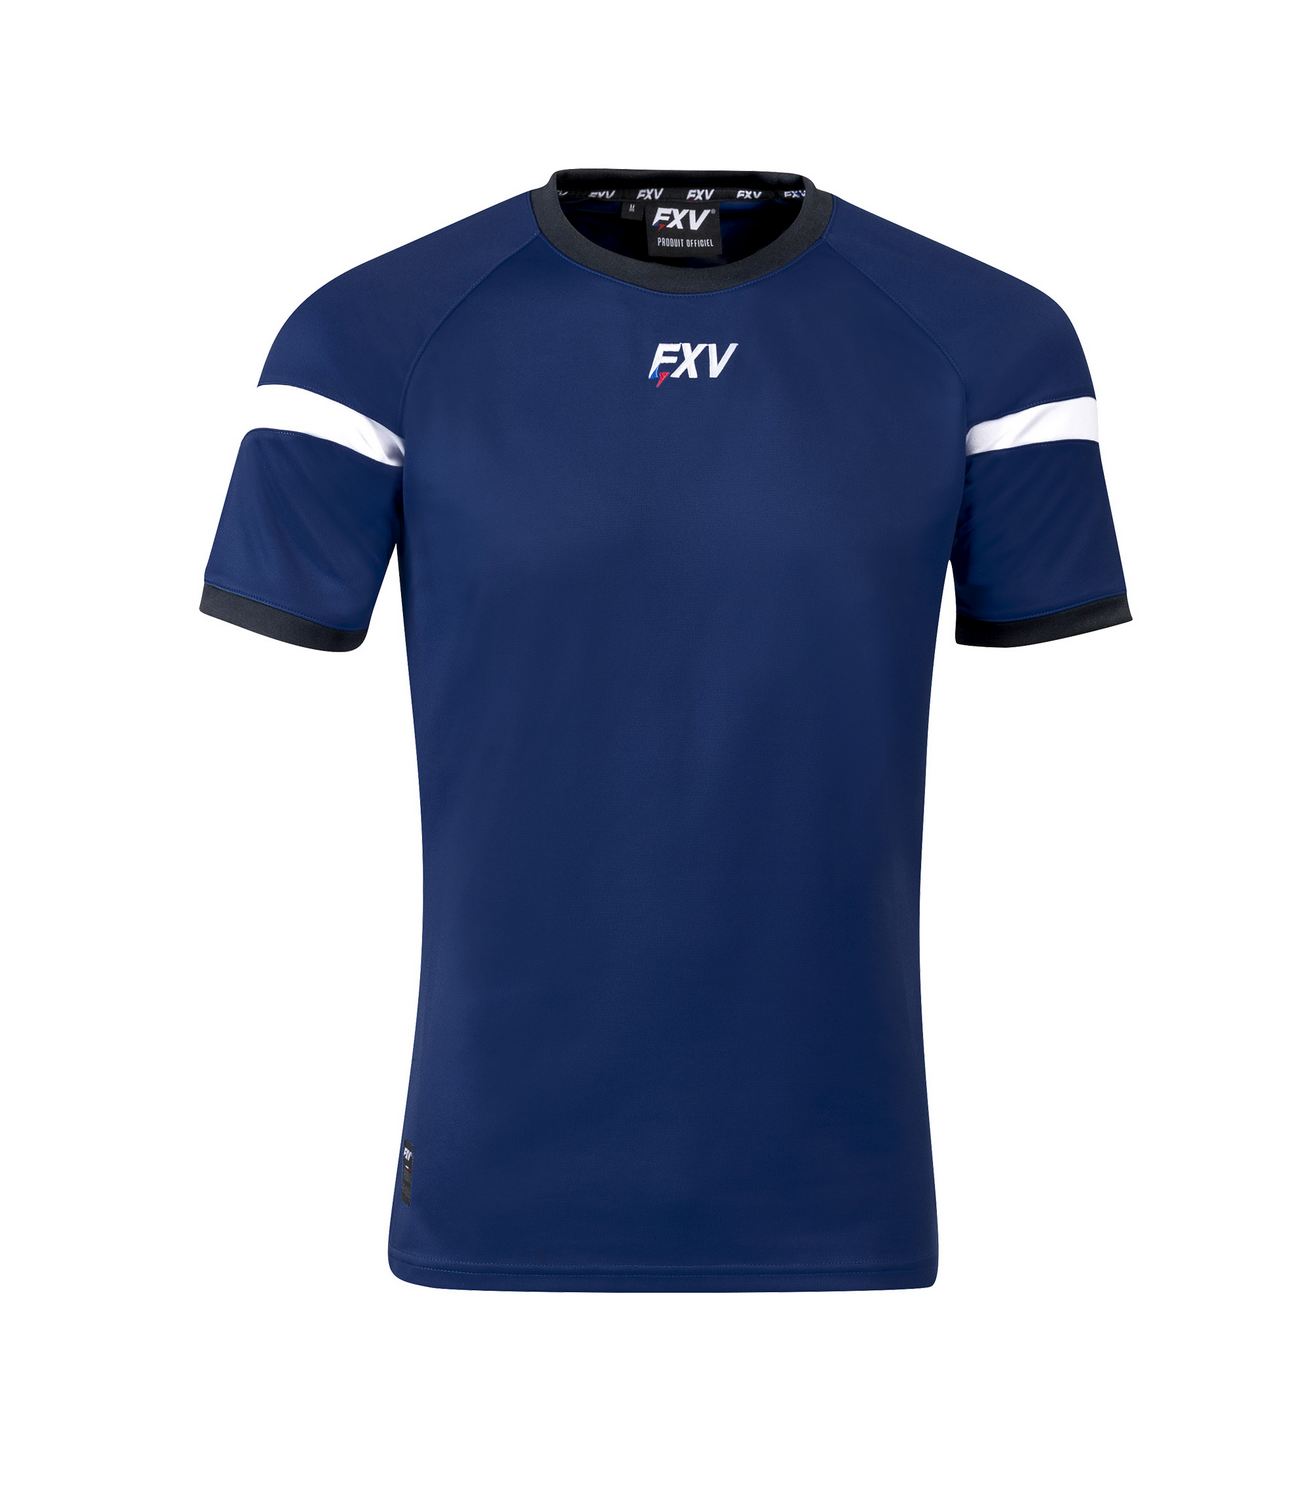 FORCE XV MAILLOT DE RUGBY TRAINING VICTOIRE Marine